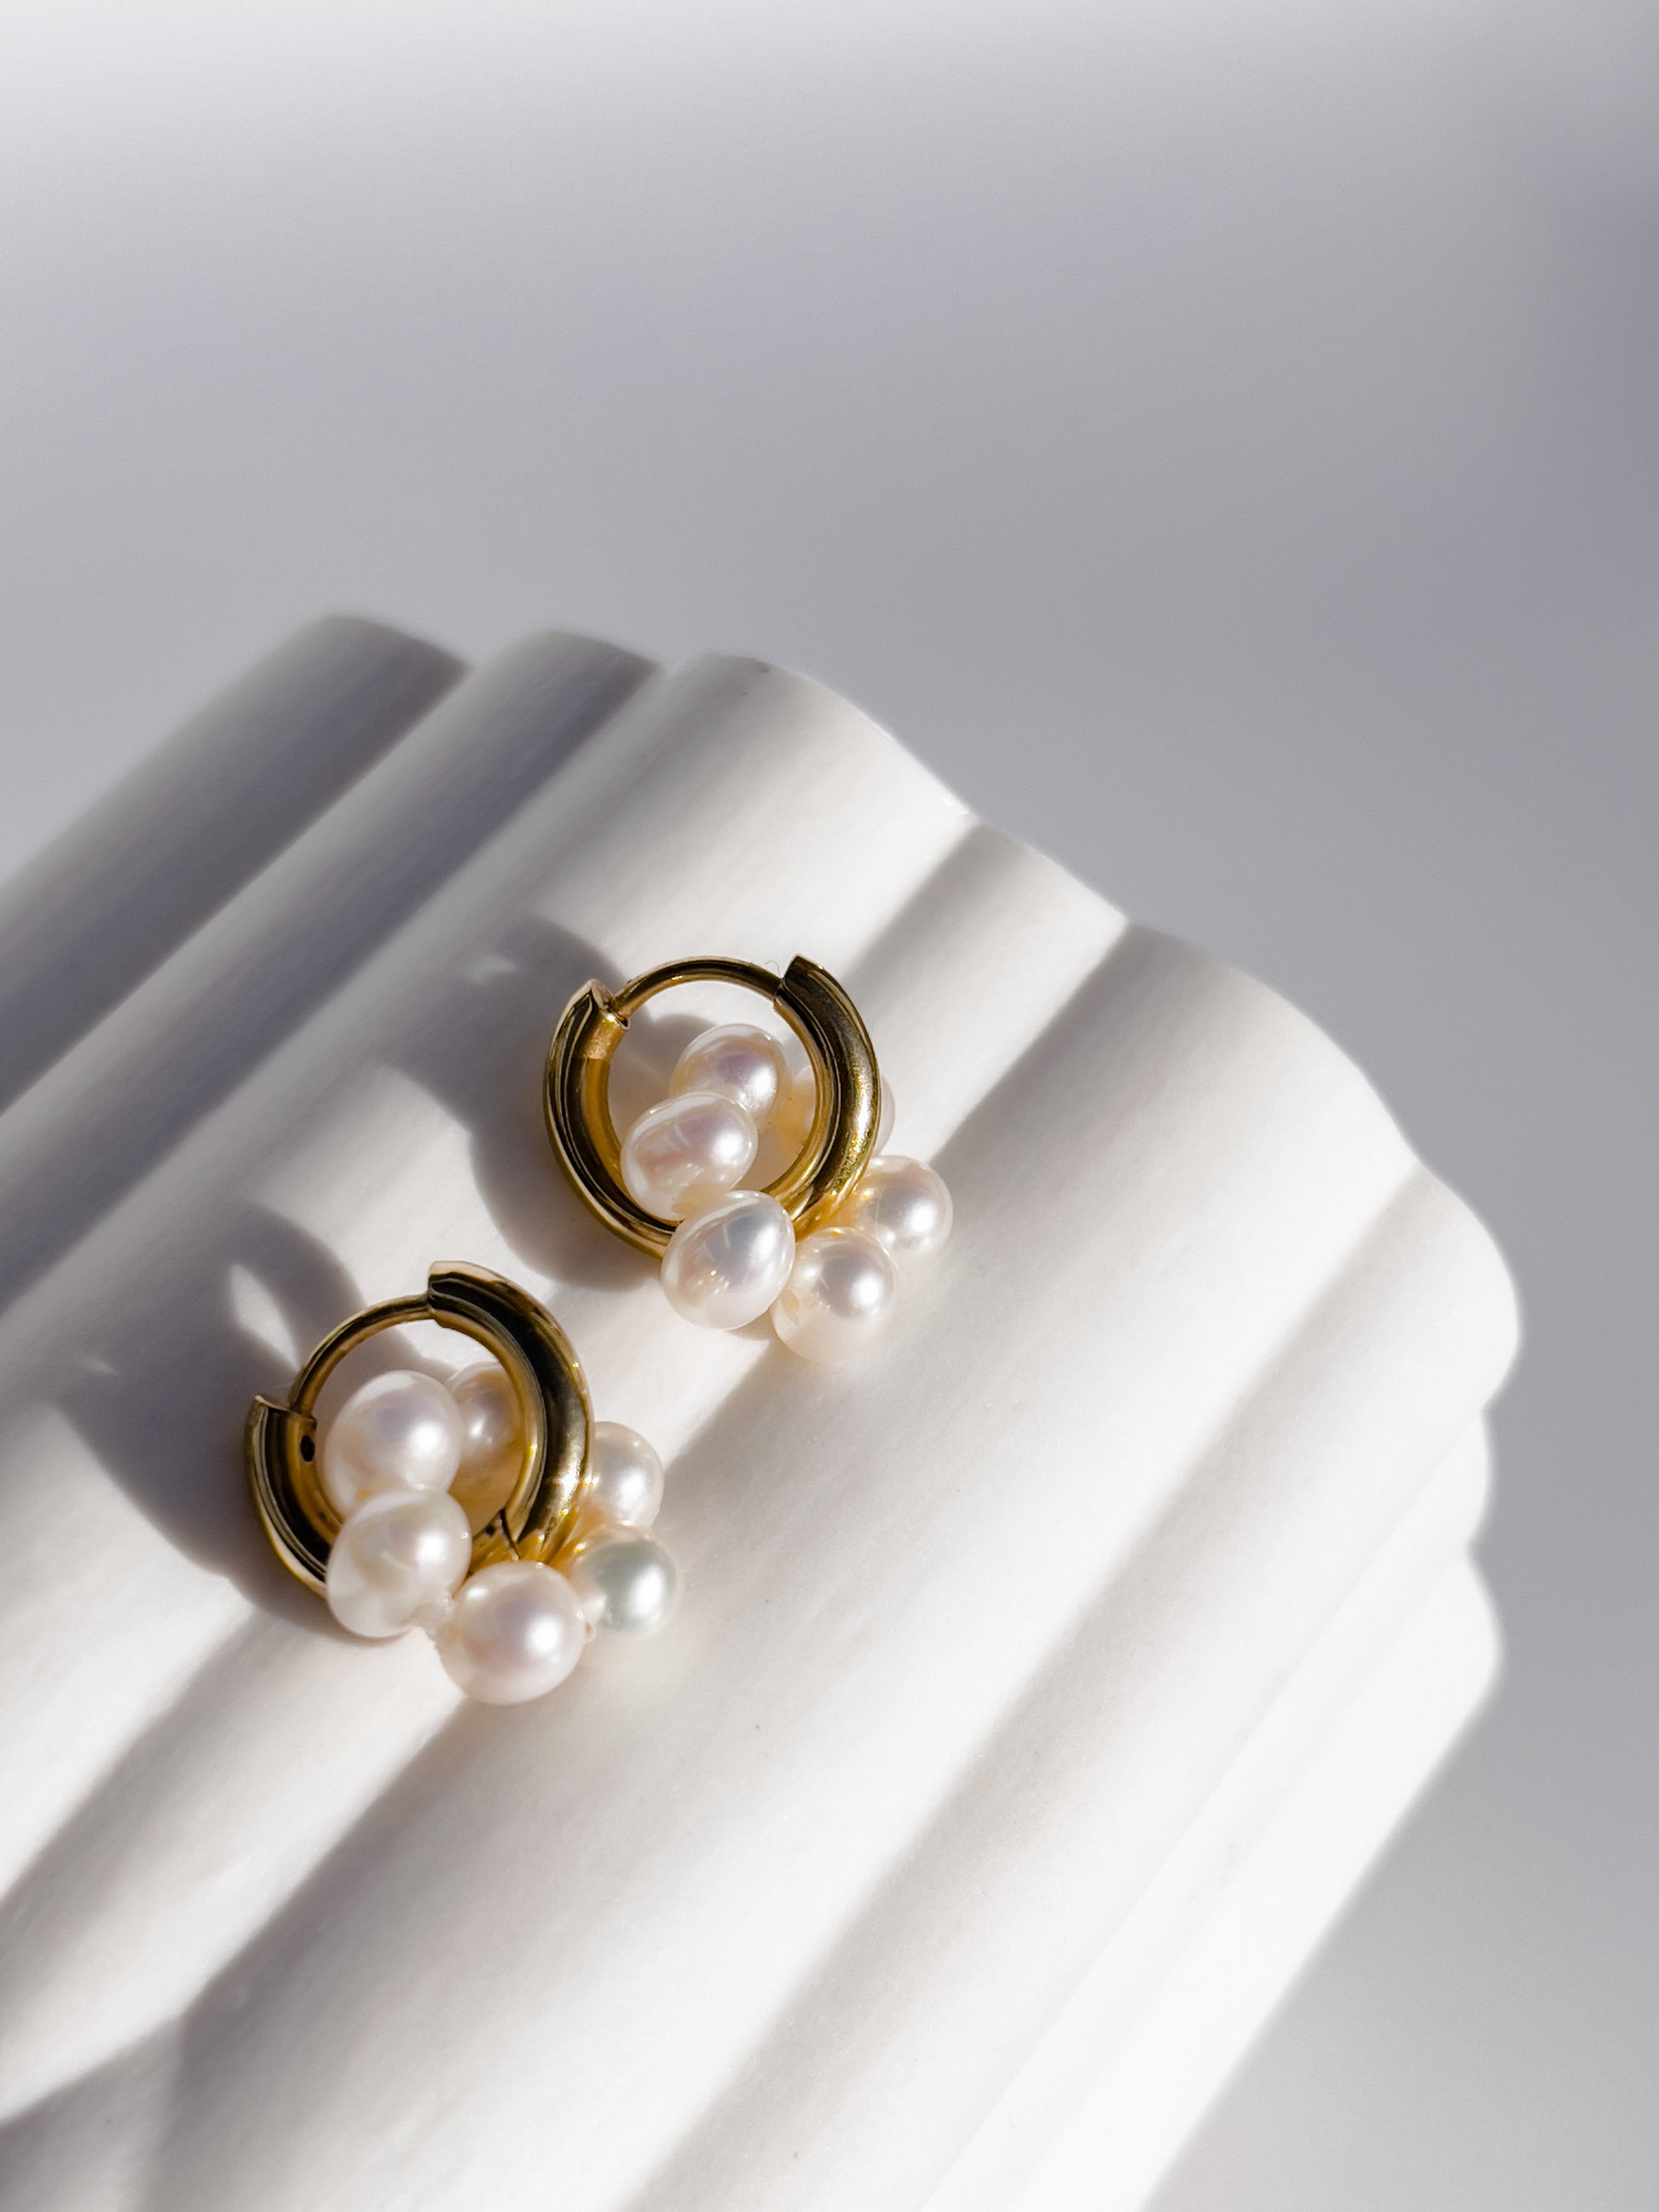 Pearl Halo Hoops - 14 karat Gold Filled Hoops, each suspending a halo of freshwater pearls. This ultra cute pair, can be worn singularly, or combined with other pieces.